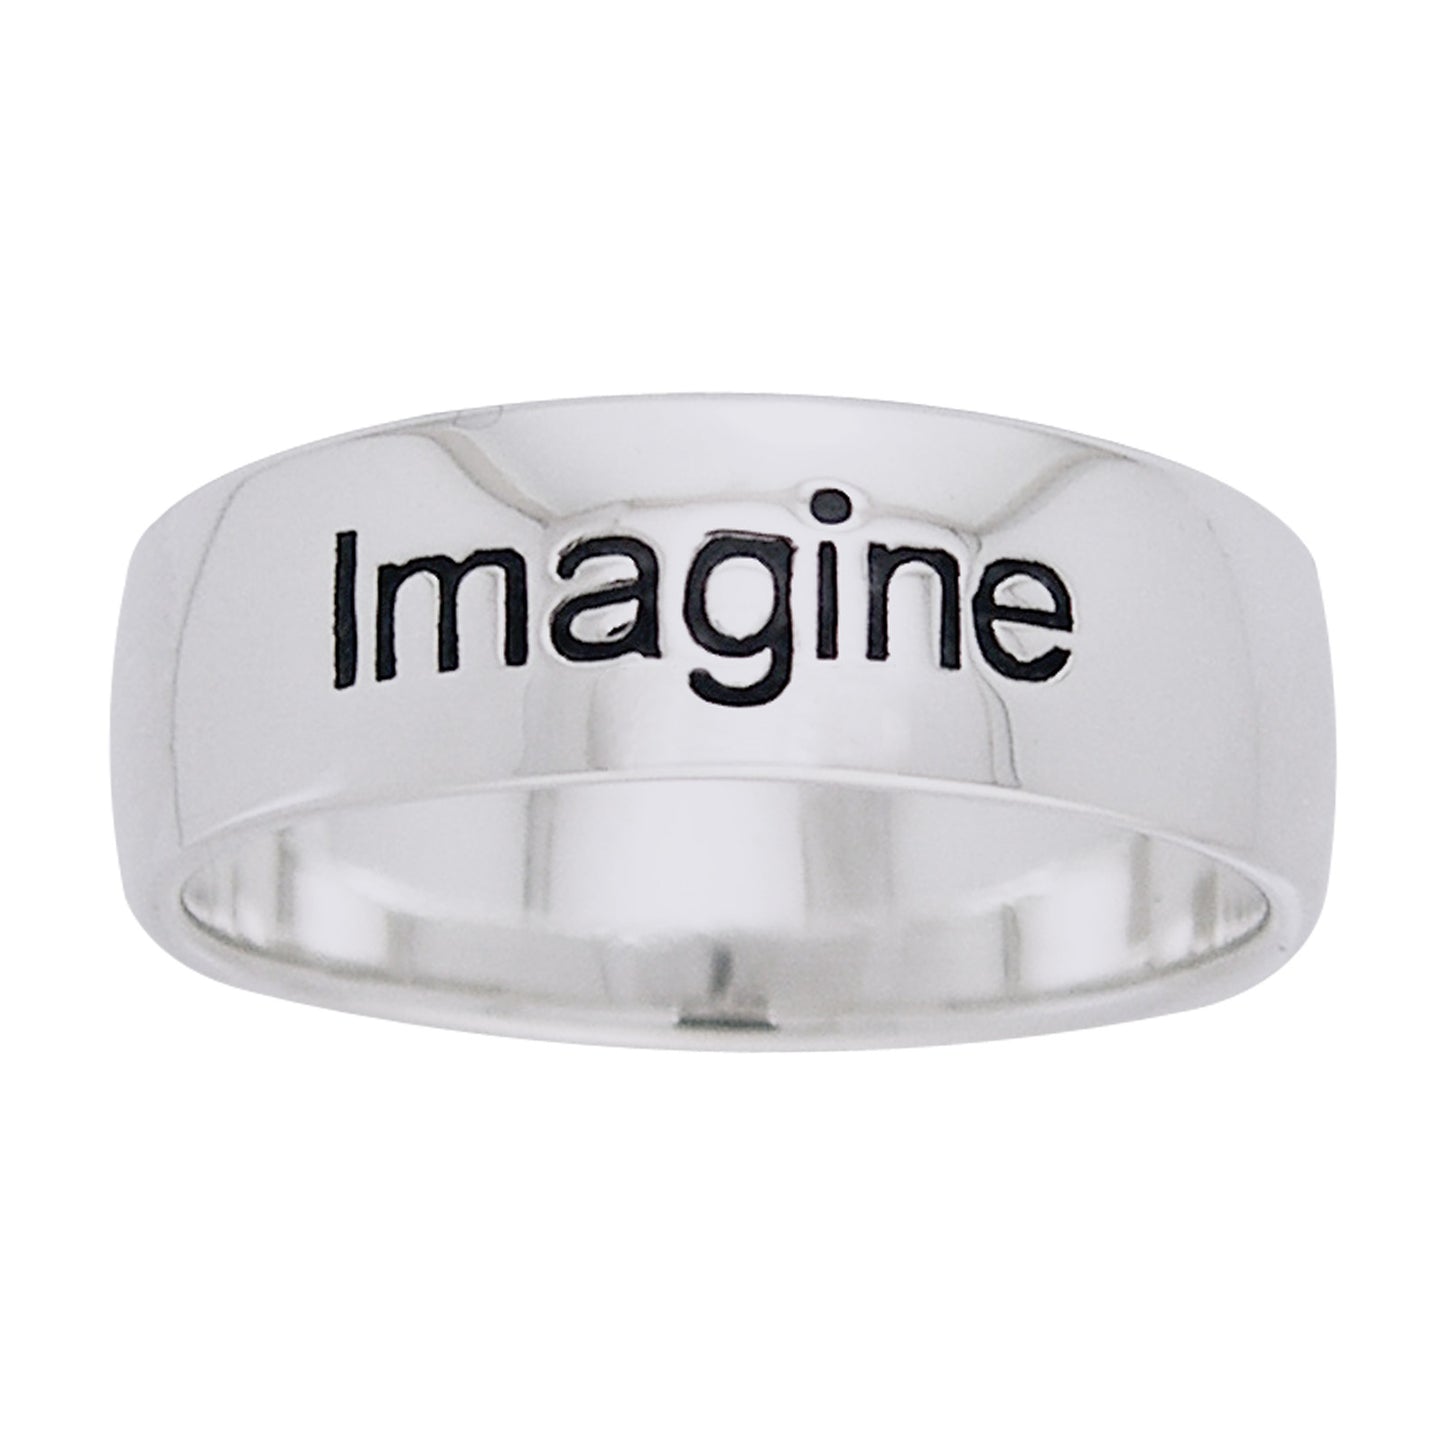 Imagine - Words of Wisdom 6mm Band Ring - Sterling Silver